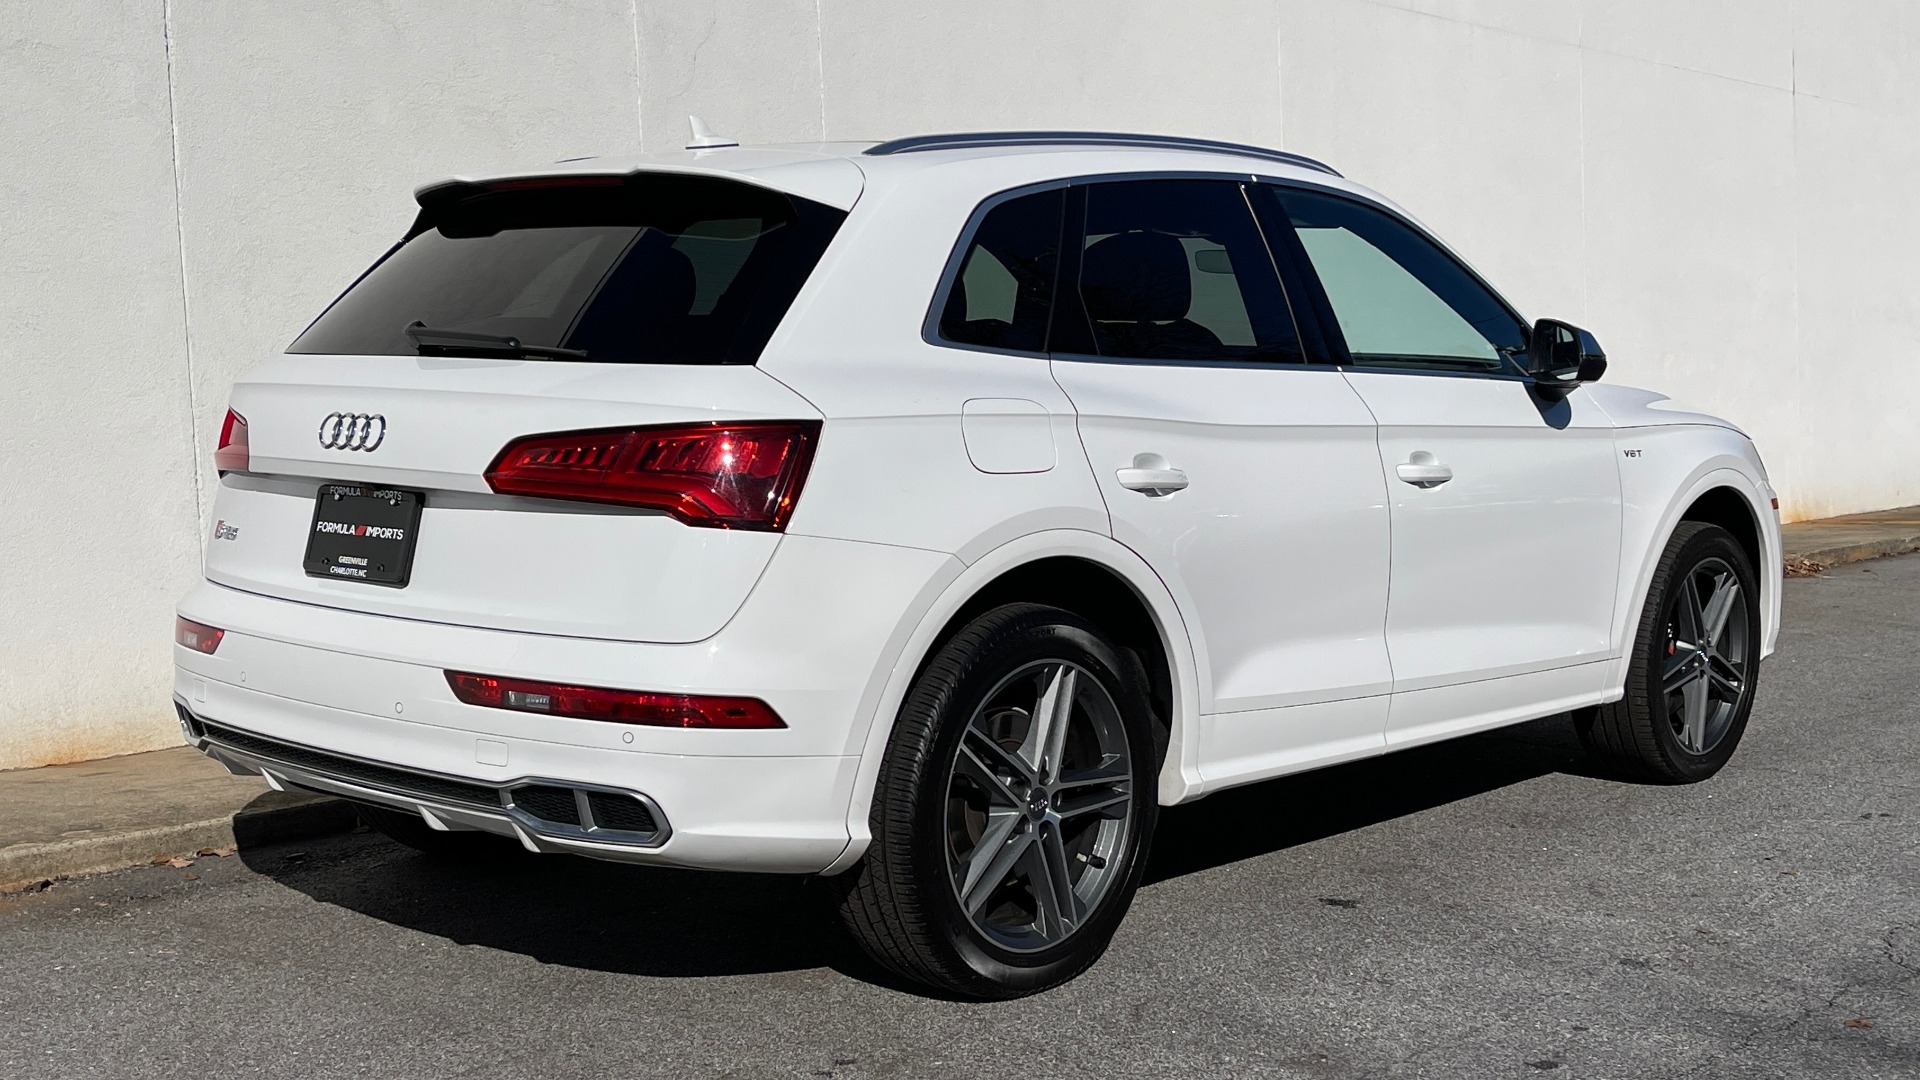 Used 2018 Audi SQ5 PREMIUM PLUS / NAV / SUNROOF / 12.3IN SCREEN / REARVIEW for sale Sold at Formula Imports in Charlotte NC 28227 6